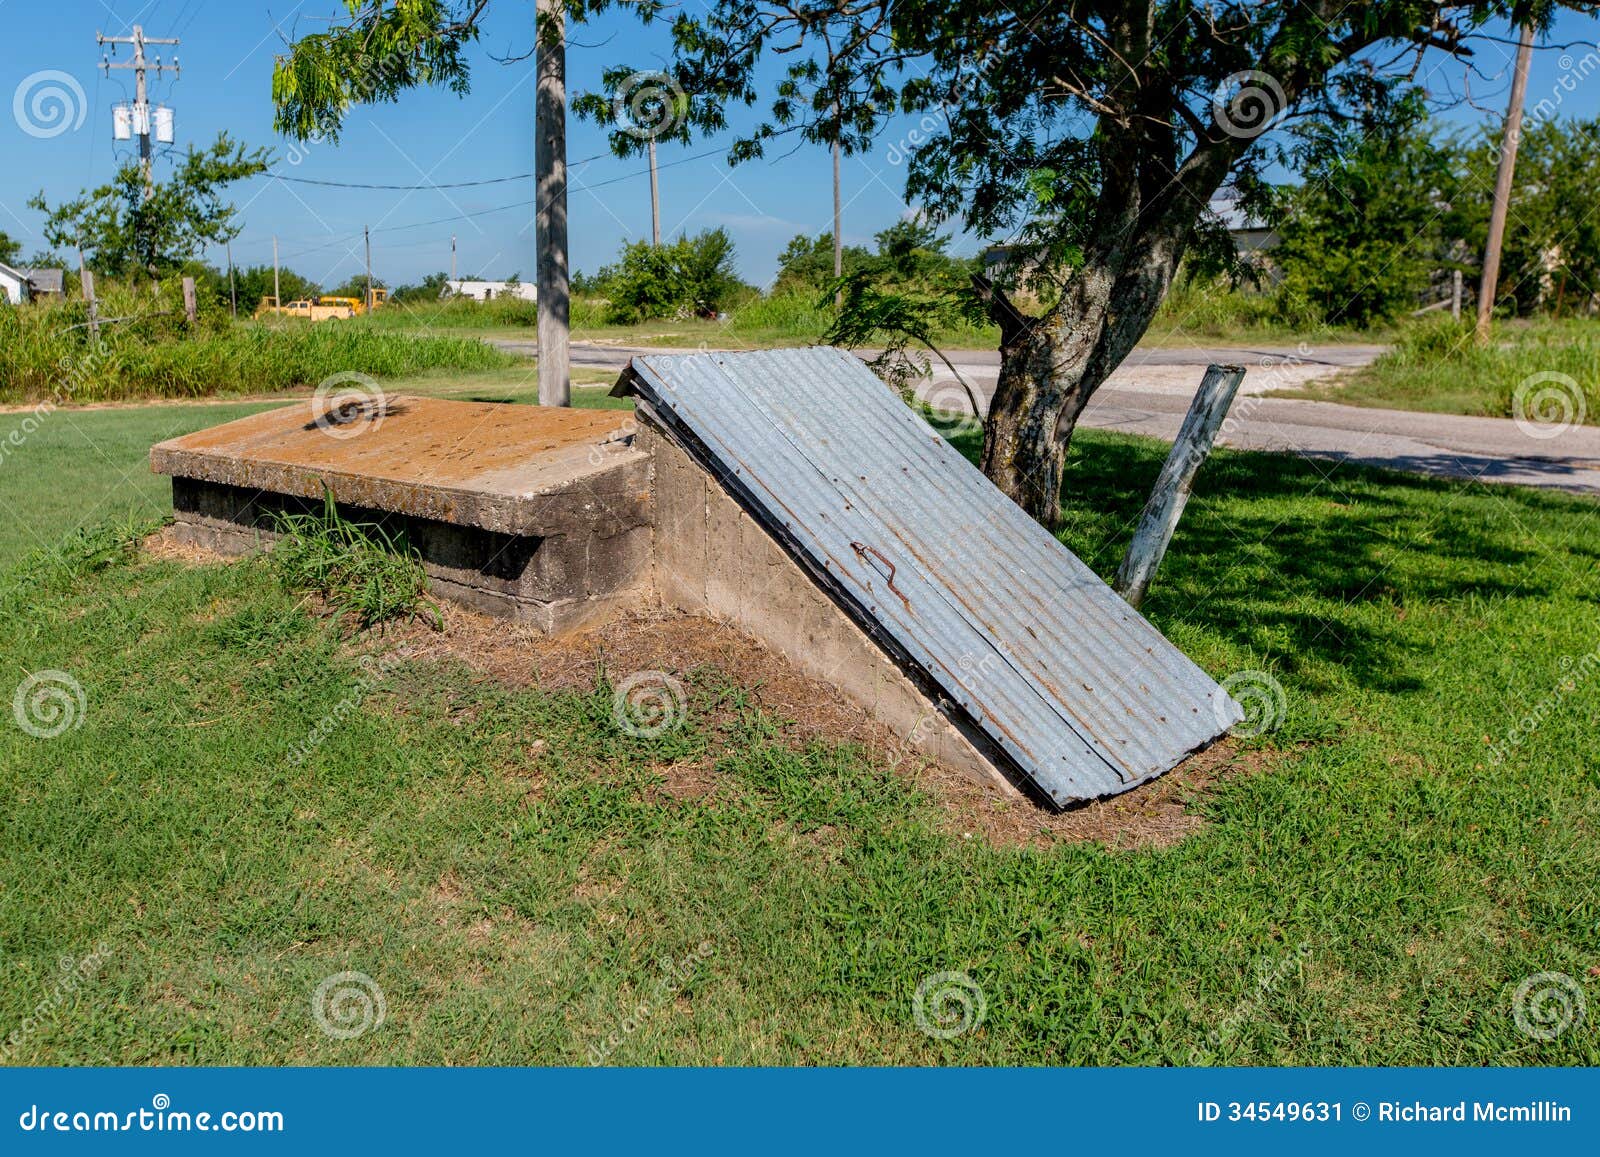 an old storm cellar or tornado shelter in rural oklahoma.